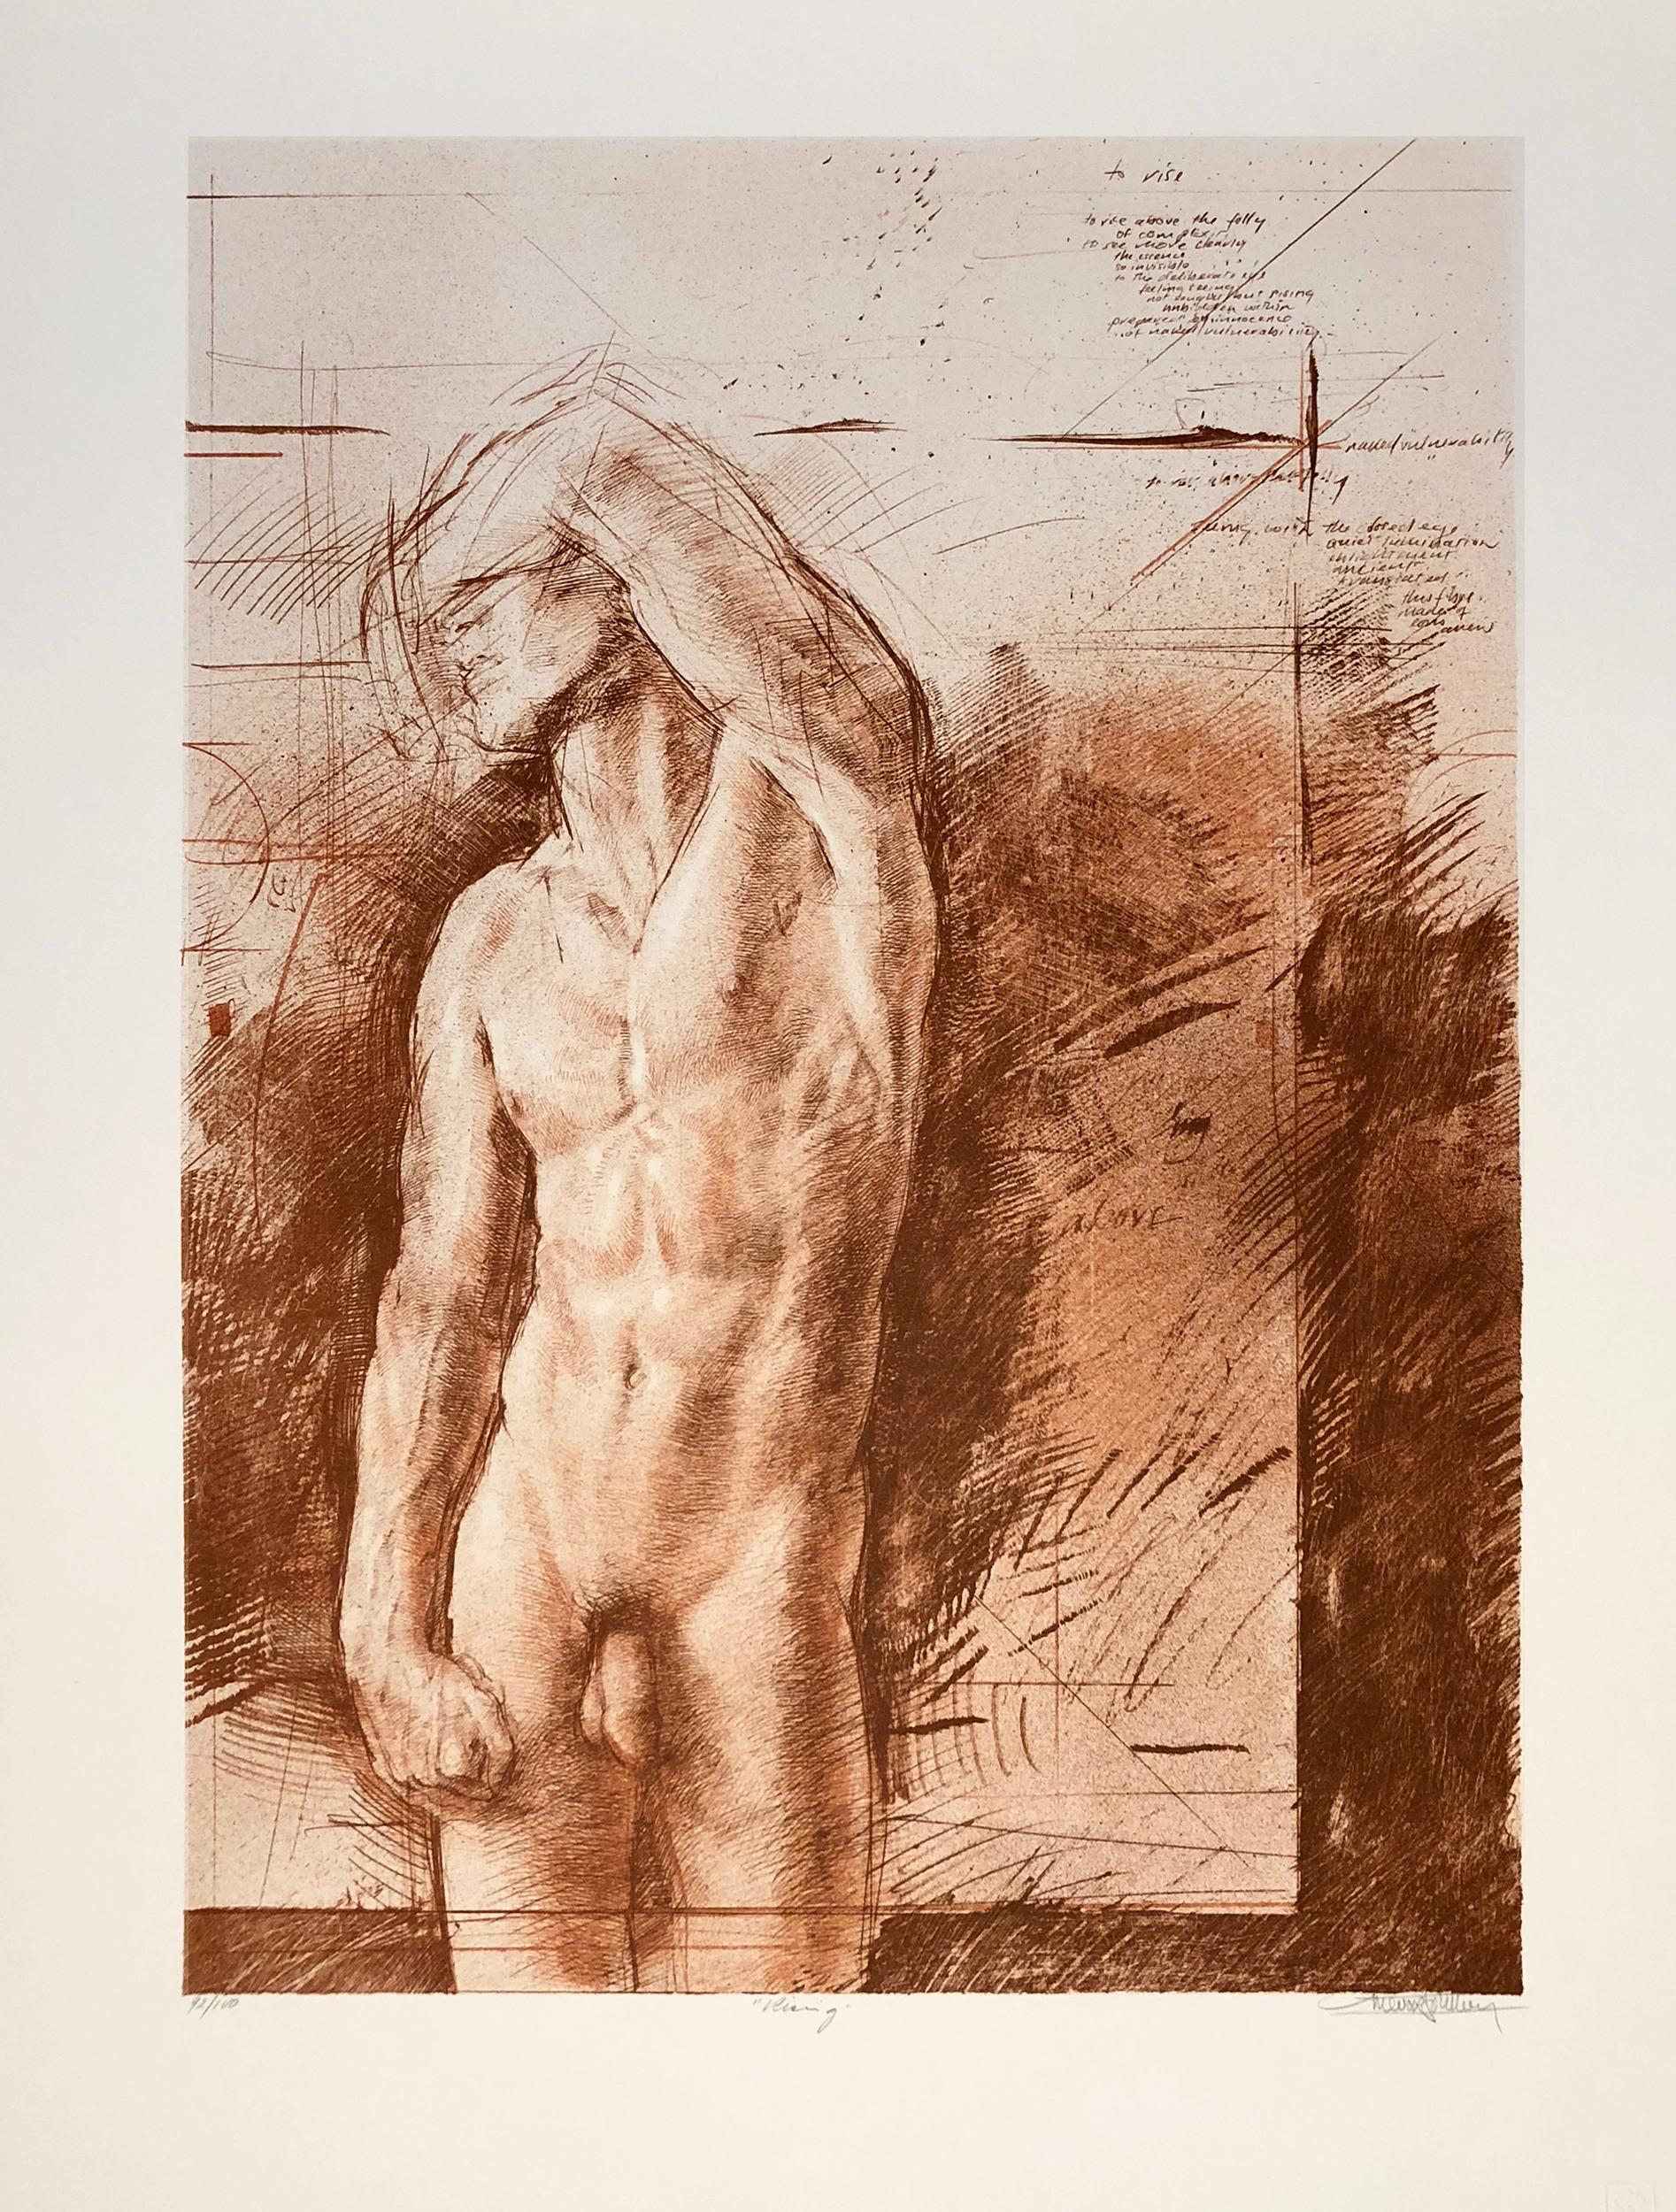 Signed, titled and numbered lithograph by Trevor Southey. Male nude portrait of a young man. this is the terra cotta version, there was also an edition done in grey.

Trevor Southey was born in Rhodesia, Africa (now Zimbabwe) in 1940. His African